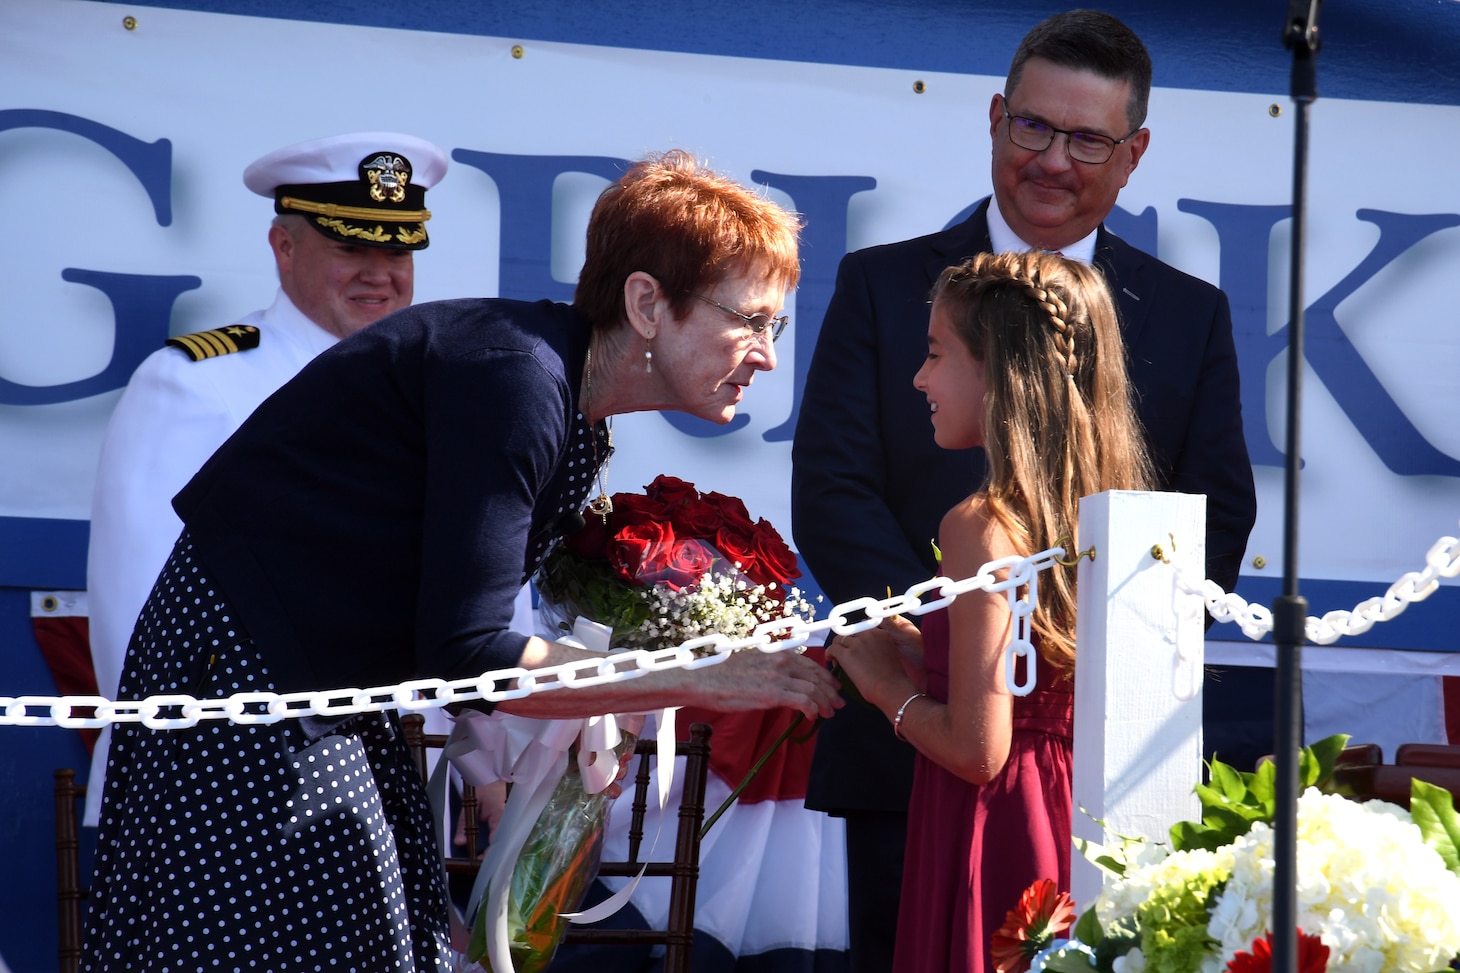 Darleen Greenert, sponsor of the pre-commissioning unit (PCU) Hyman G. Rickover (SSN 795), hands a flower to Mya Rae Marsiglio, a granddaughter of a shipyard employee, during a christening ceremony at General Dynamics Electric Boat shipyard facility in Groton, Conn., July 31, 2021.